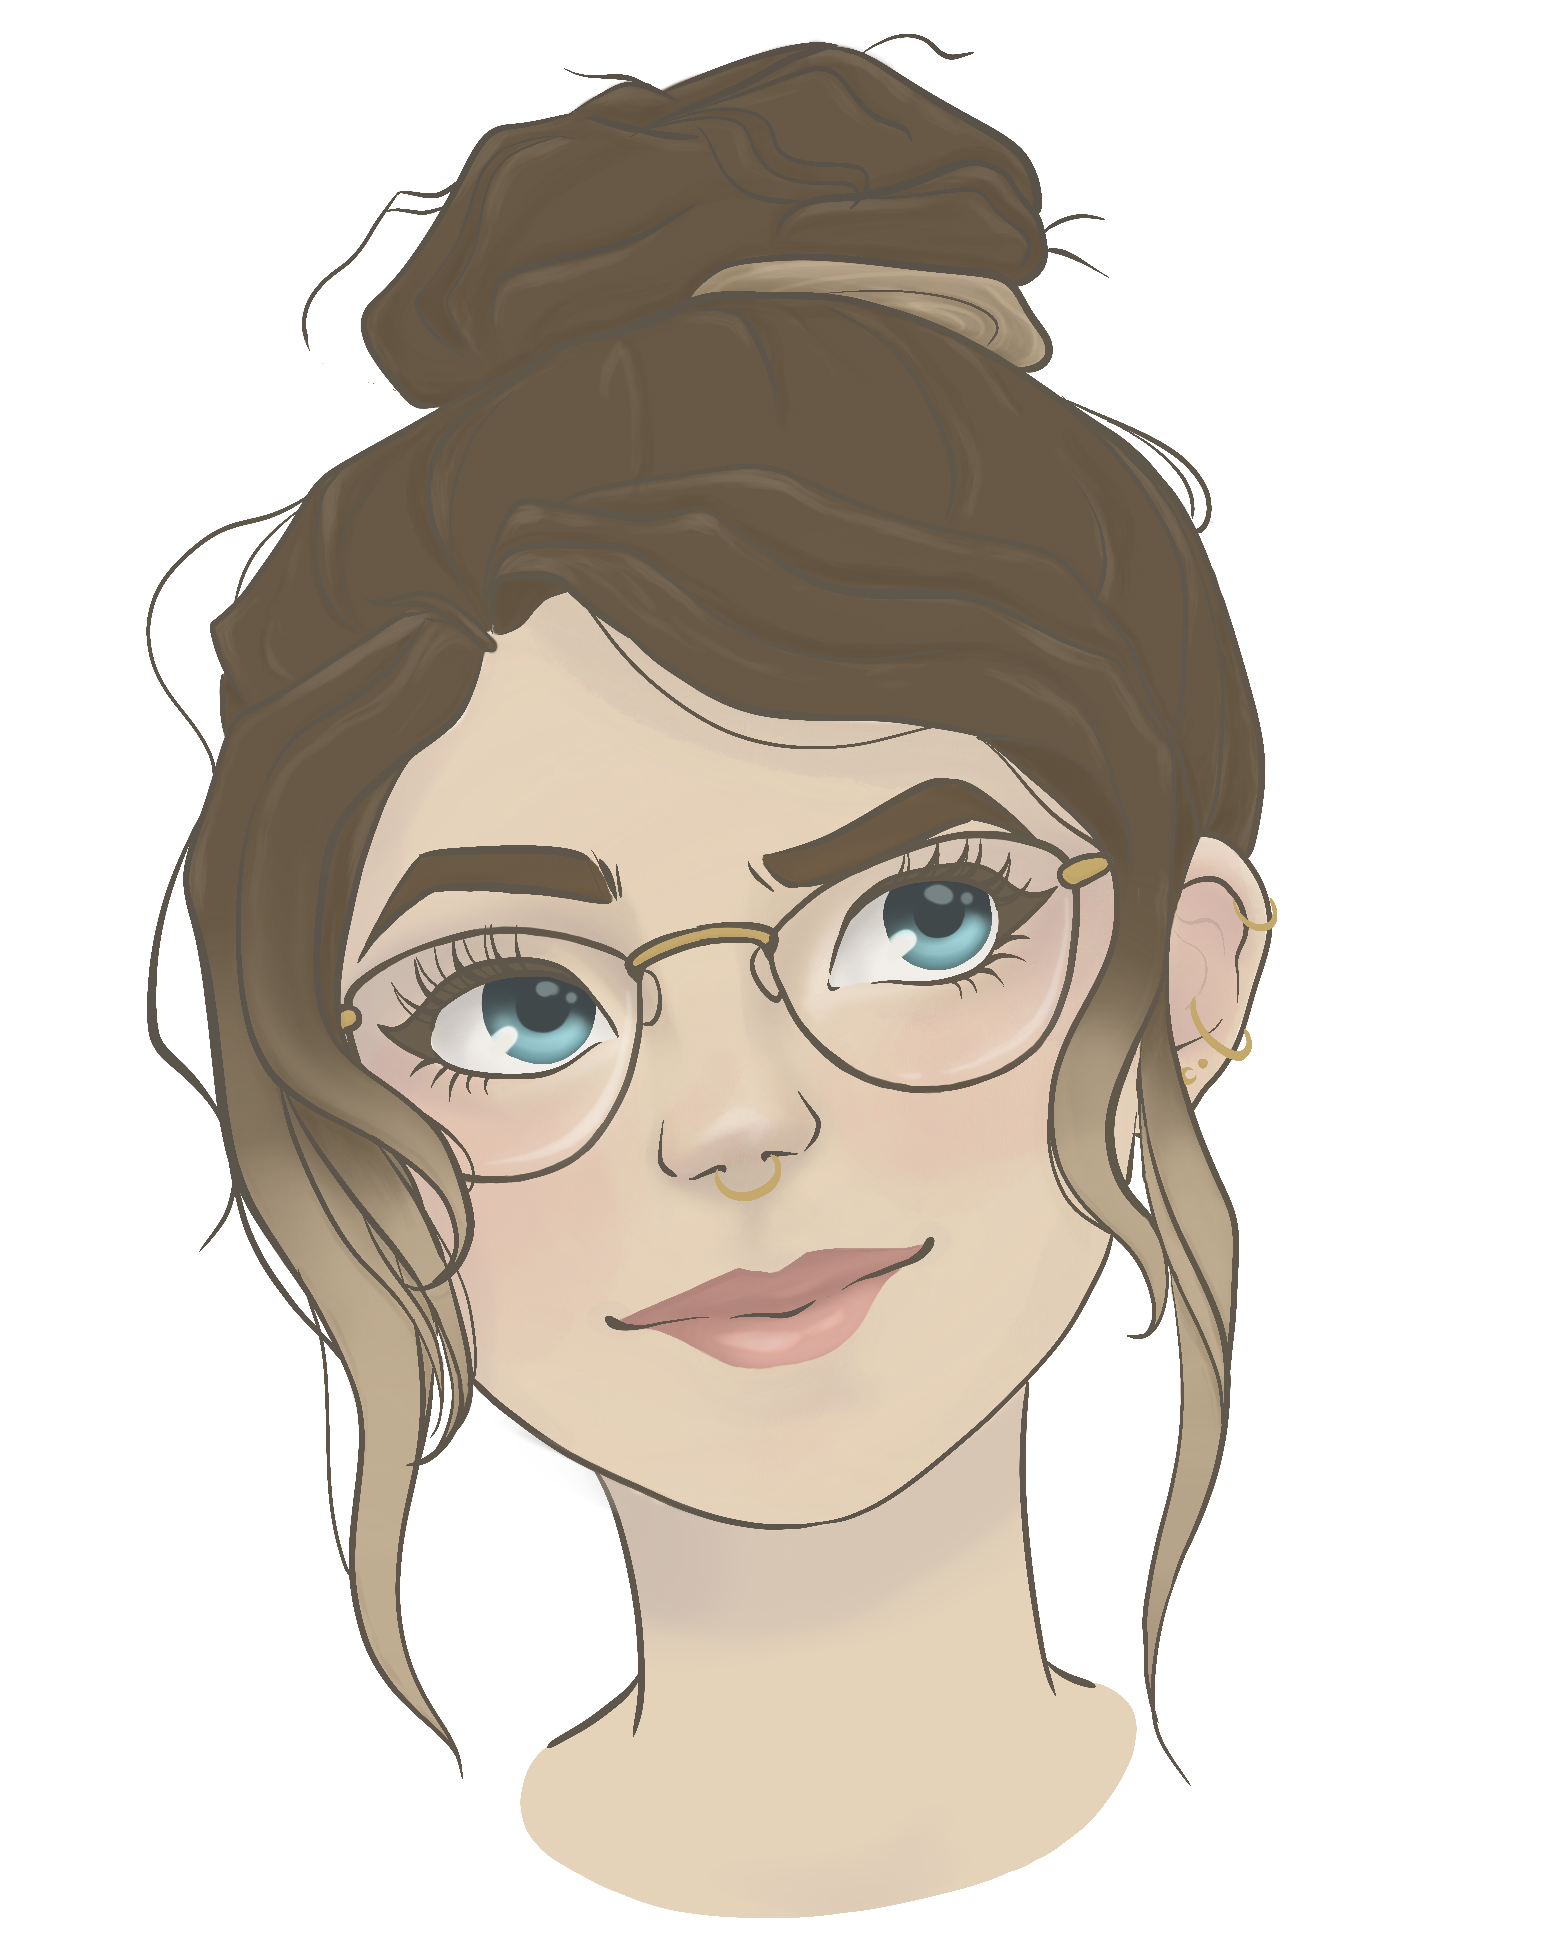 A digital drawing of a person wearing glasses, with their hair in a messy bun